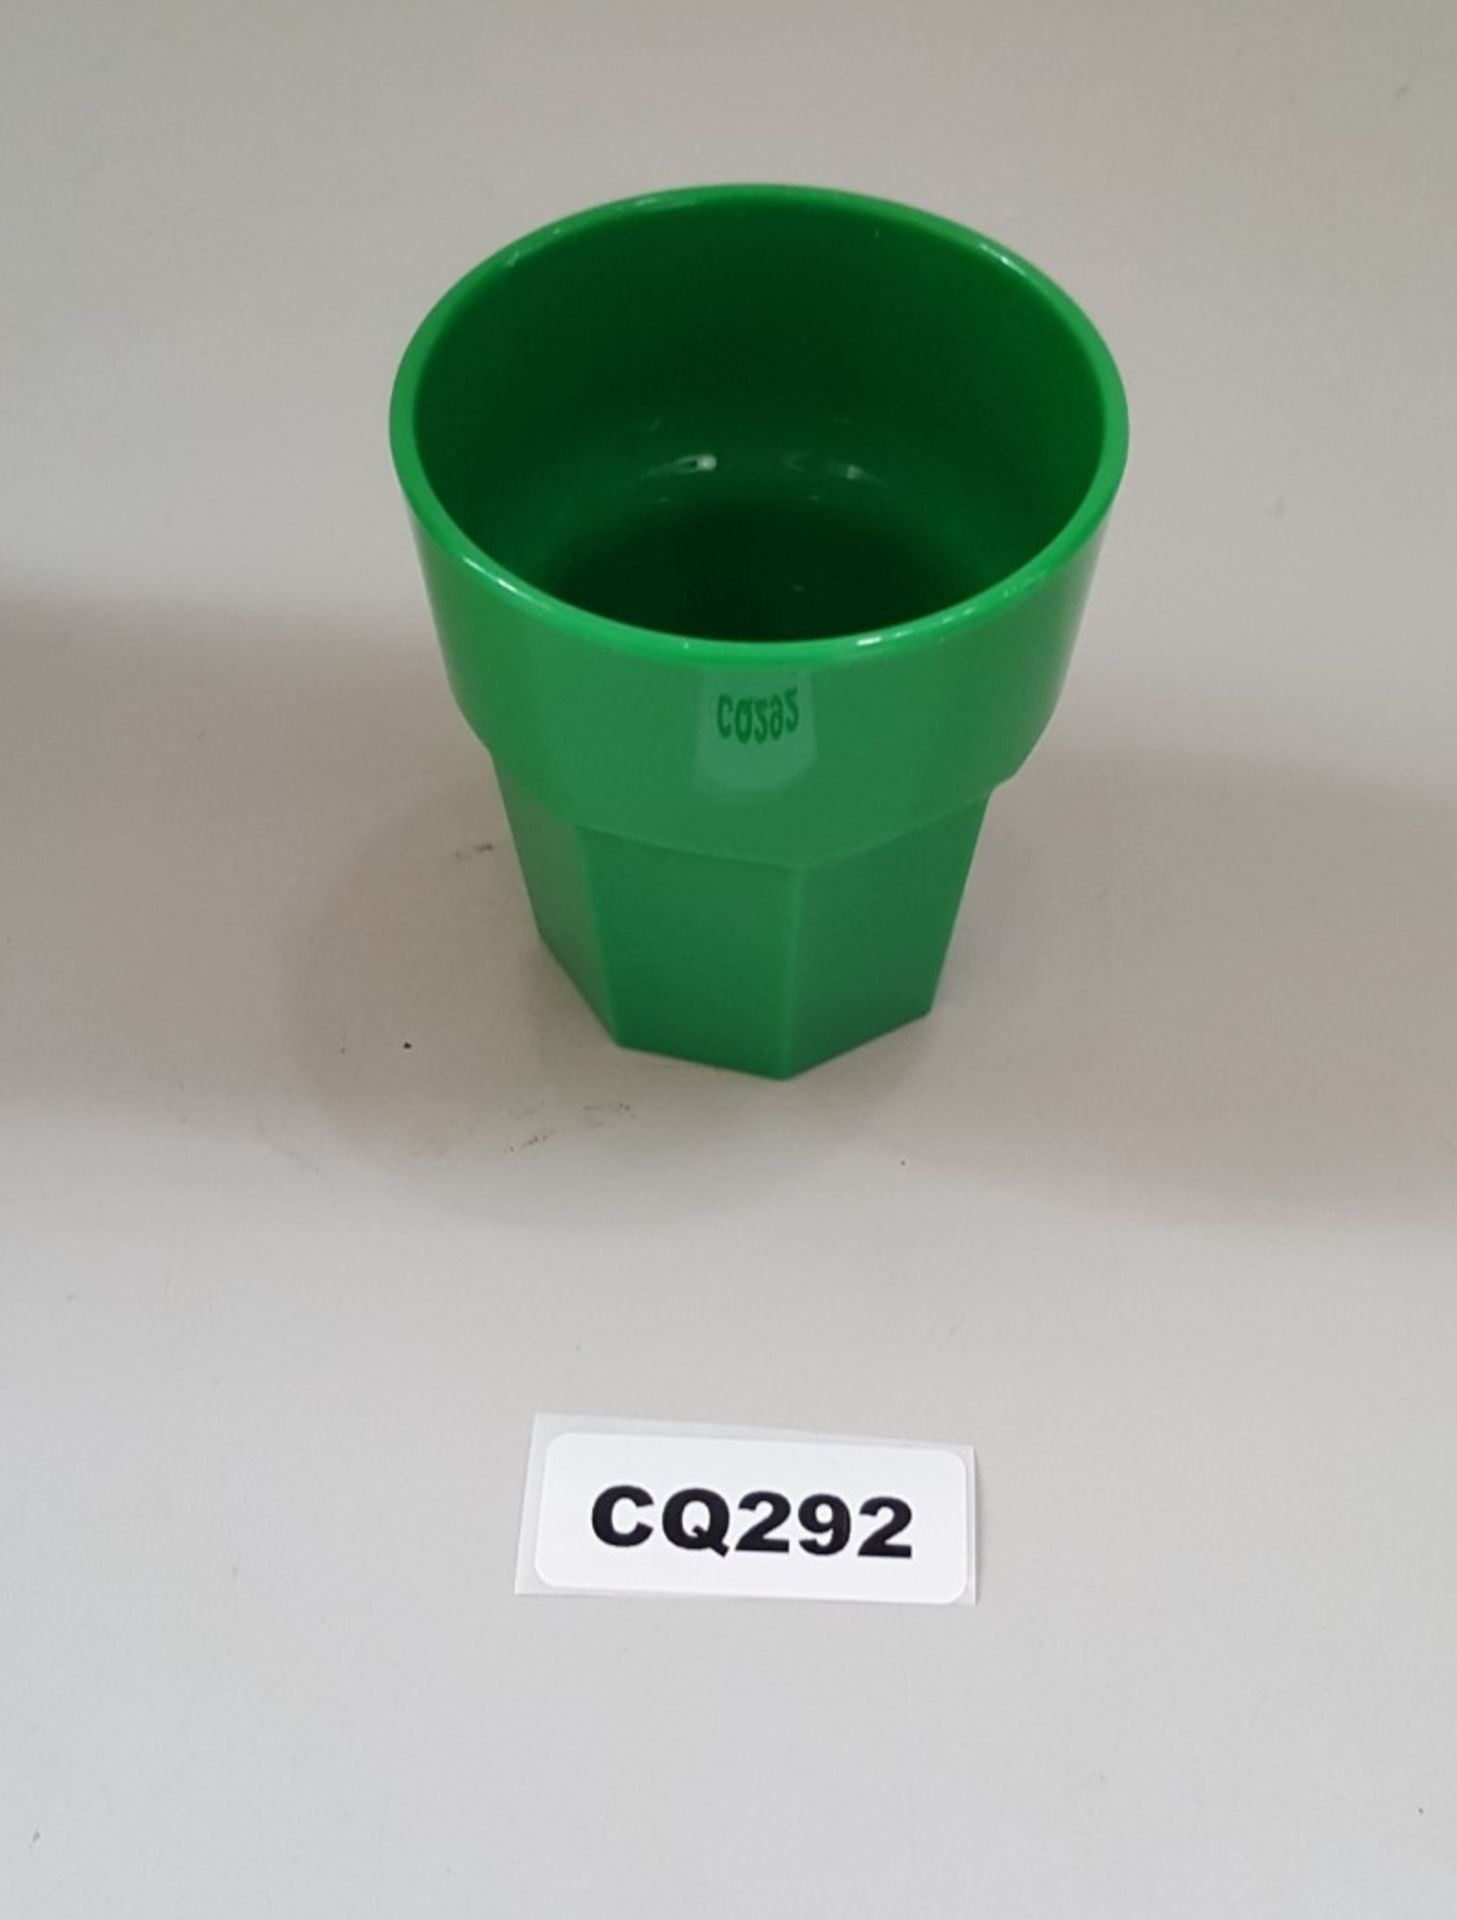 17 x NEW BBP Polycarbonate Rocks Tumbler Cups 256ml Green - Ref CQ292 - Image 2 of 3